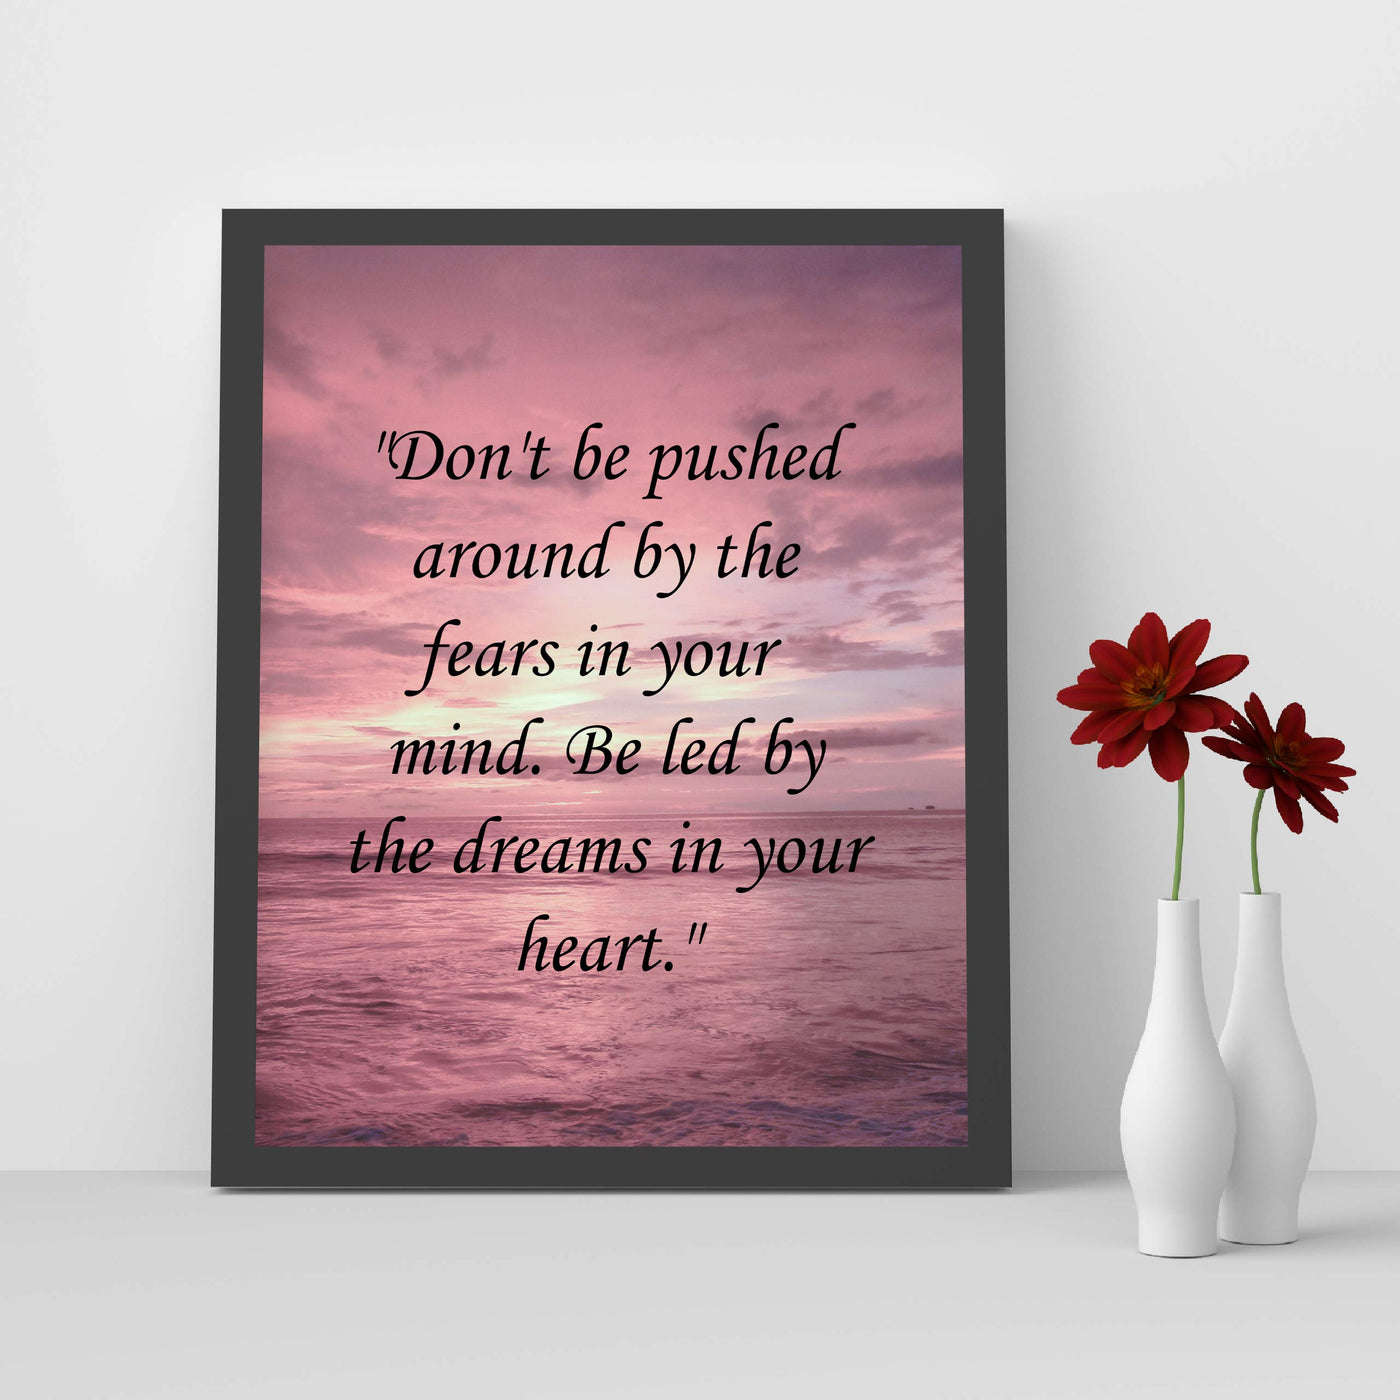 ?Be Led By the Dreams In Your Heart? Motivational Quotes Wall Art -8 x 10" Ocean Sunset Poster Print-Ready to Frame. Inspirational Decor for Home-Office-School-Dorm. Great Sign for Motivation!